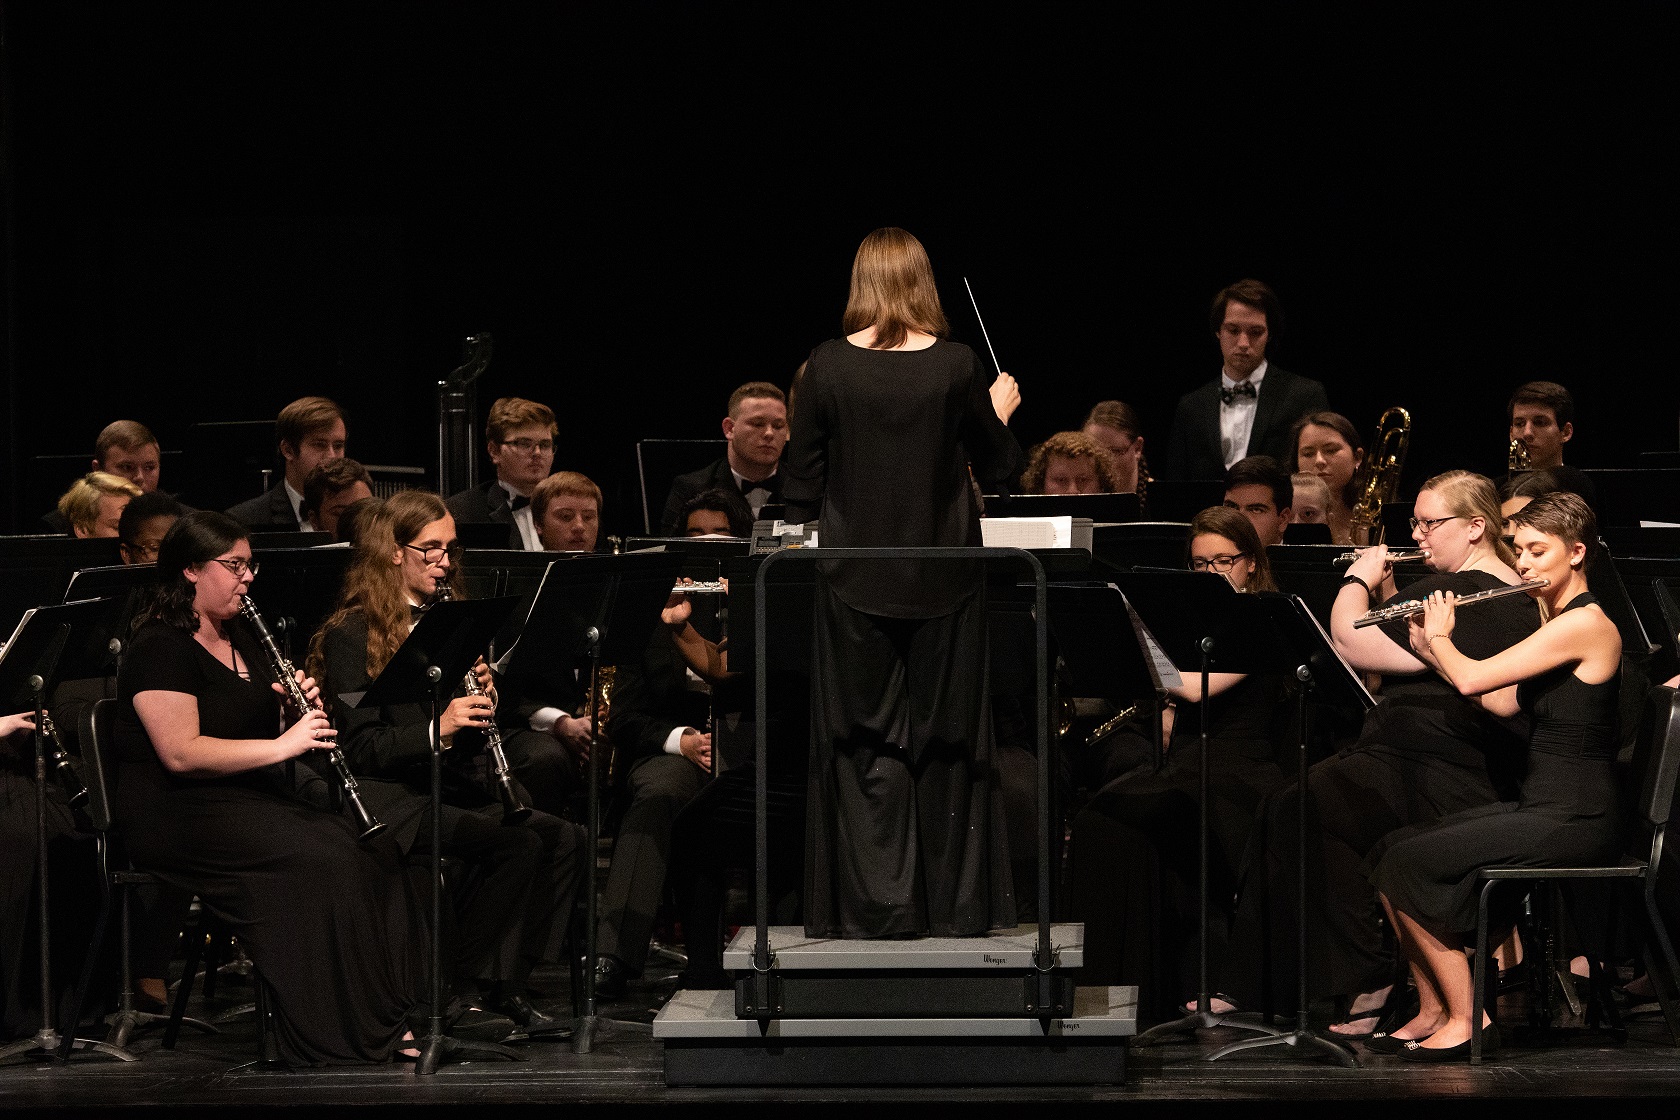 A band director is center stage with her back to the audience. Band members playing various woodwind instruments face her. They are all dressed in black